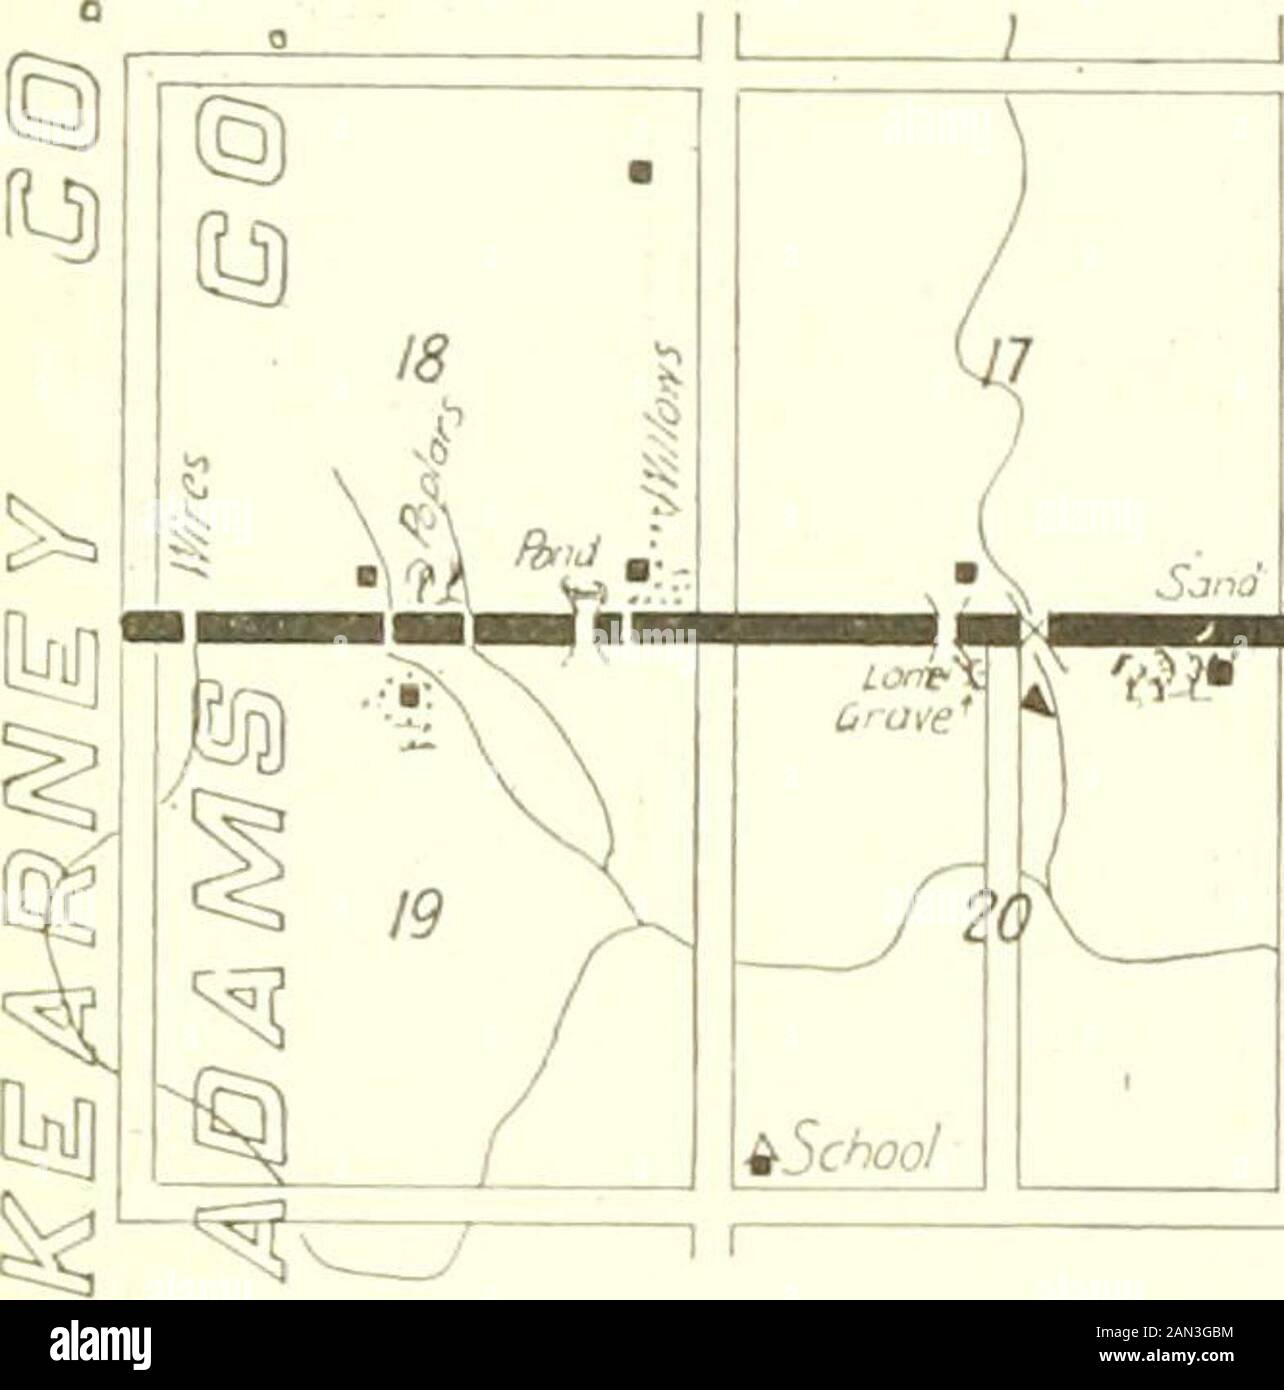 Huebinger's map and guide for Omaha-Denver transcontinental route; . Pop. 200. Alt. 2.094 ft. 13.1 W. to Minden, 15.9 E. to Ju-ni.Tta, 441.5 W. to Denyer, 190.8 E.to Omaha. Distance measured by Warner AutoMeter. HOTELS—Commercial Hotel, Eur. REPAIRS—iW. Steinhacli. GAS—Stephen Scliultz, L. R. Con-verse, G. F. Veith. nI 127. Stock Photo